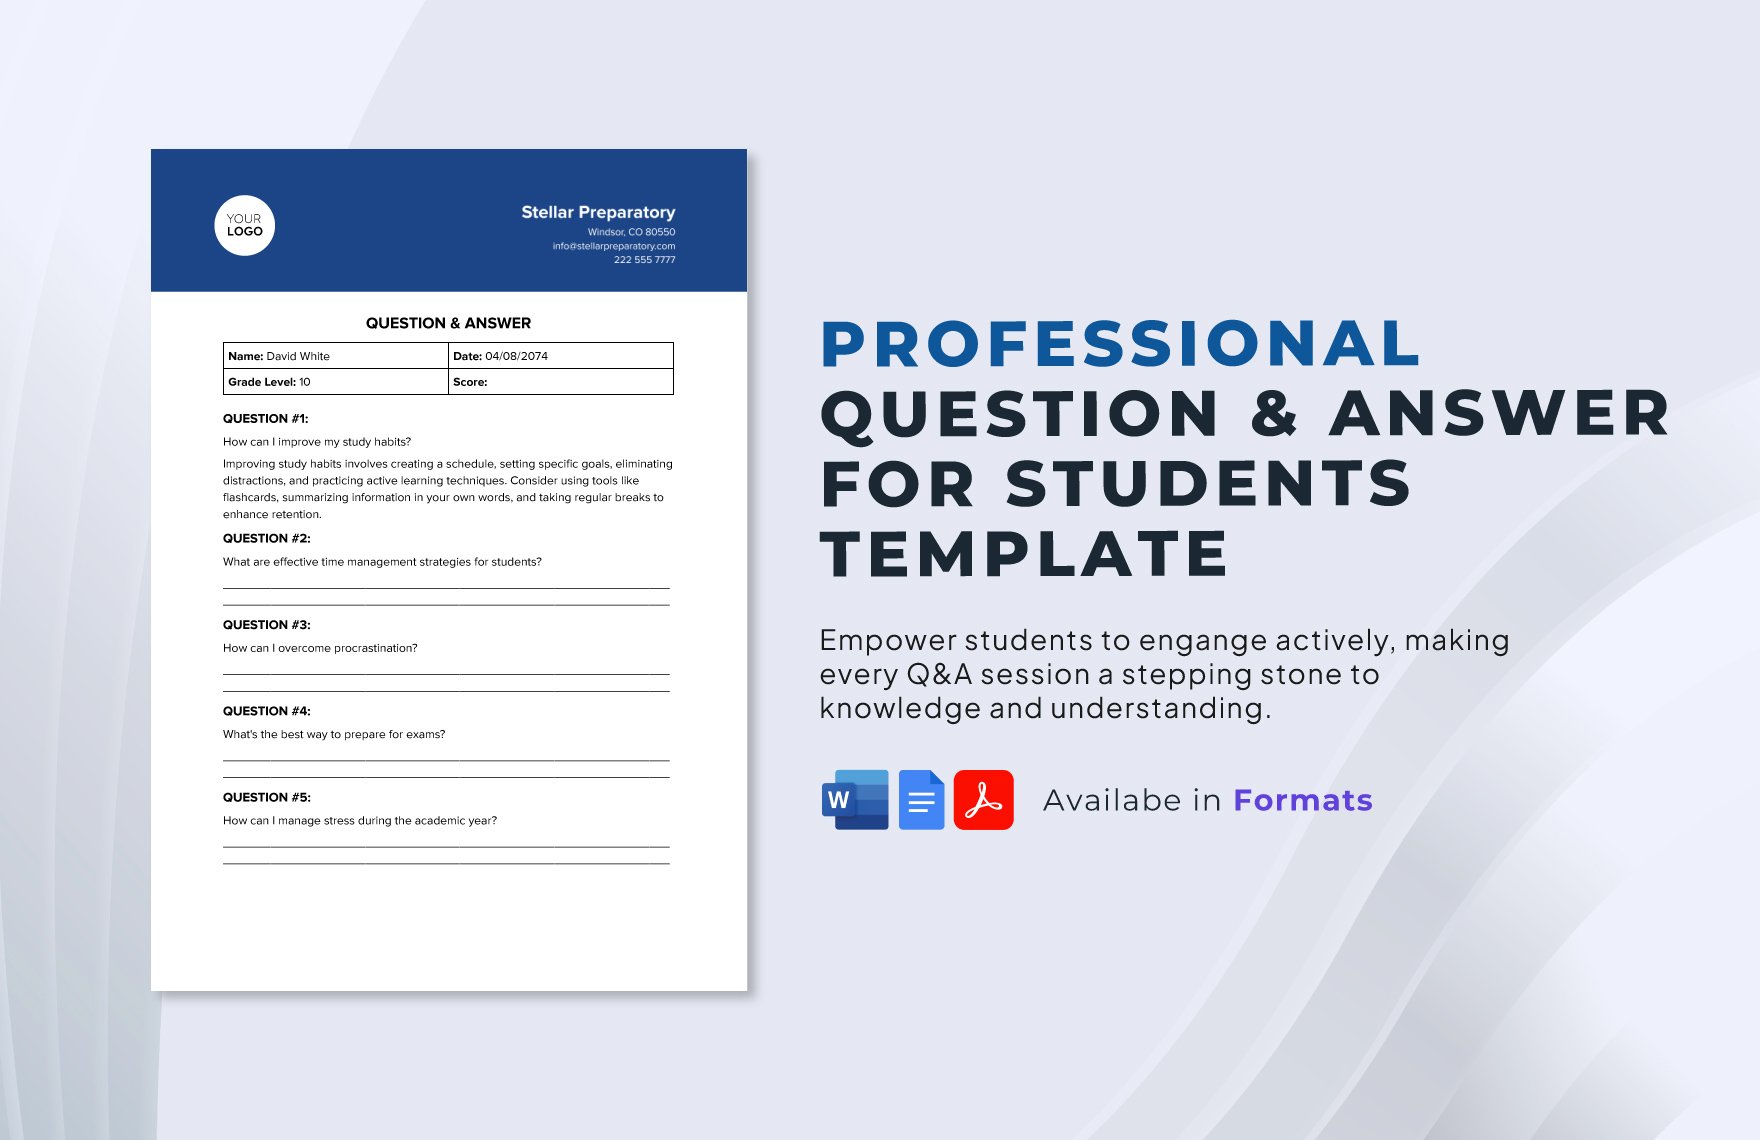 Question & Answer for Students Template